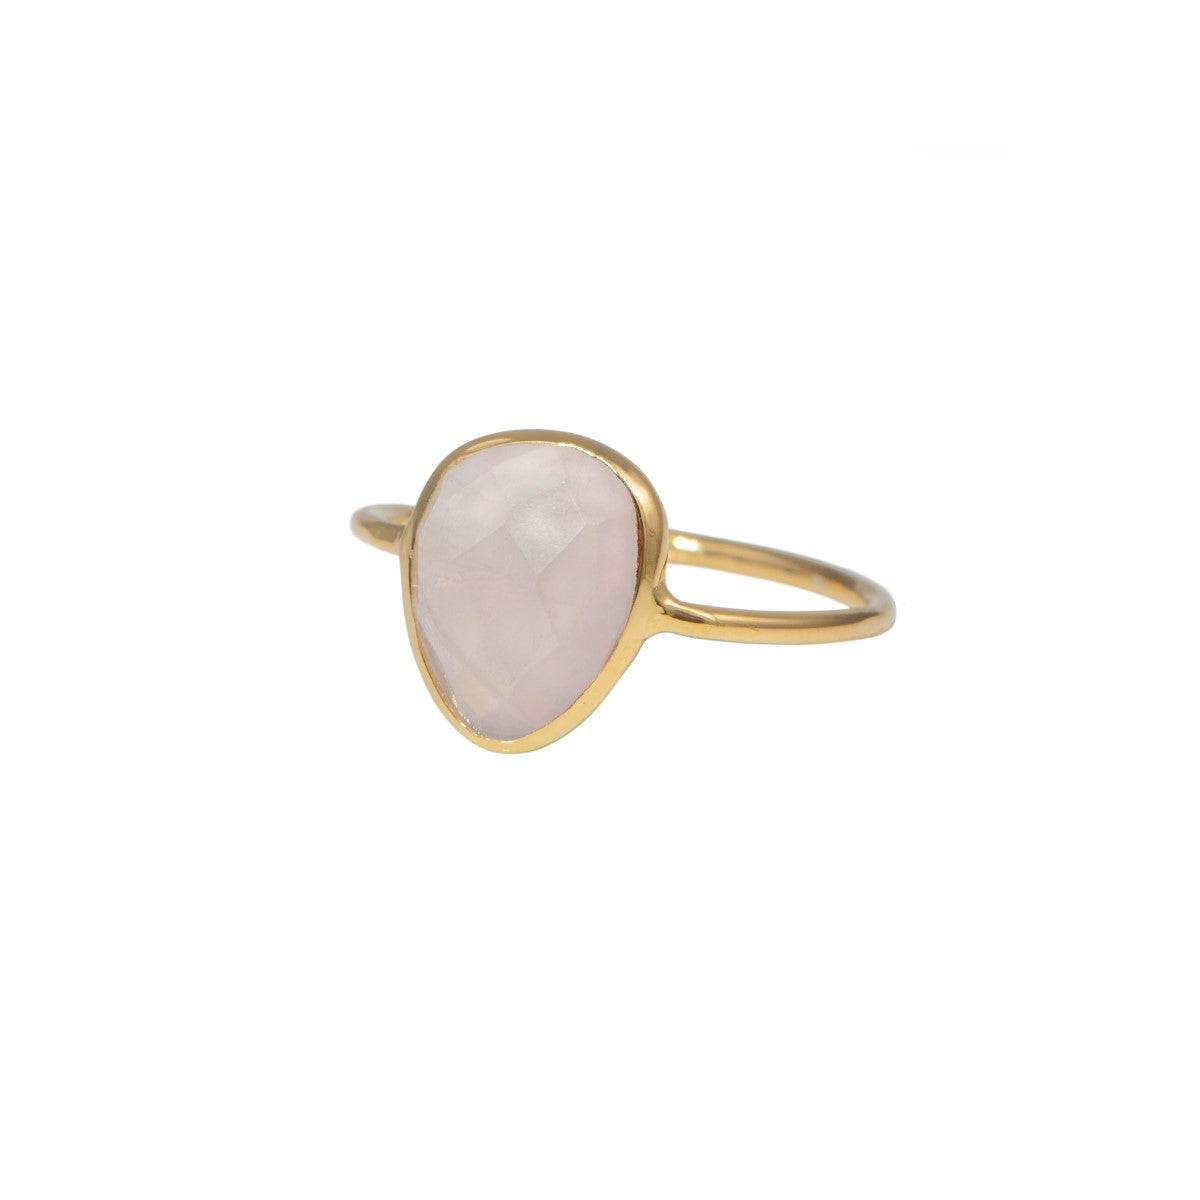 Rose Quartz Organic Elliptical Shaped Gemstone Fine Band Ring in Gold Plated Sterling Silver